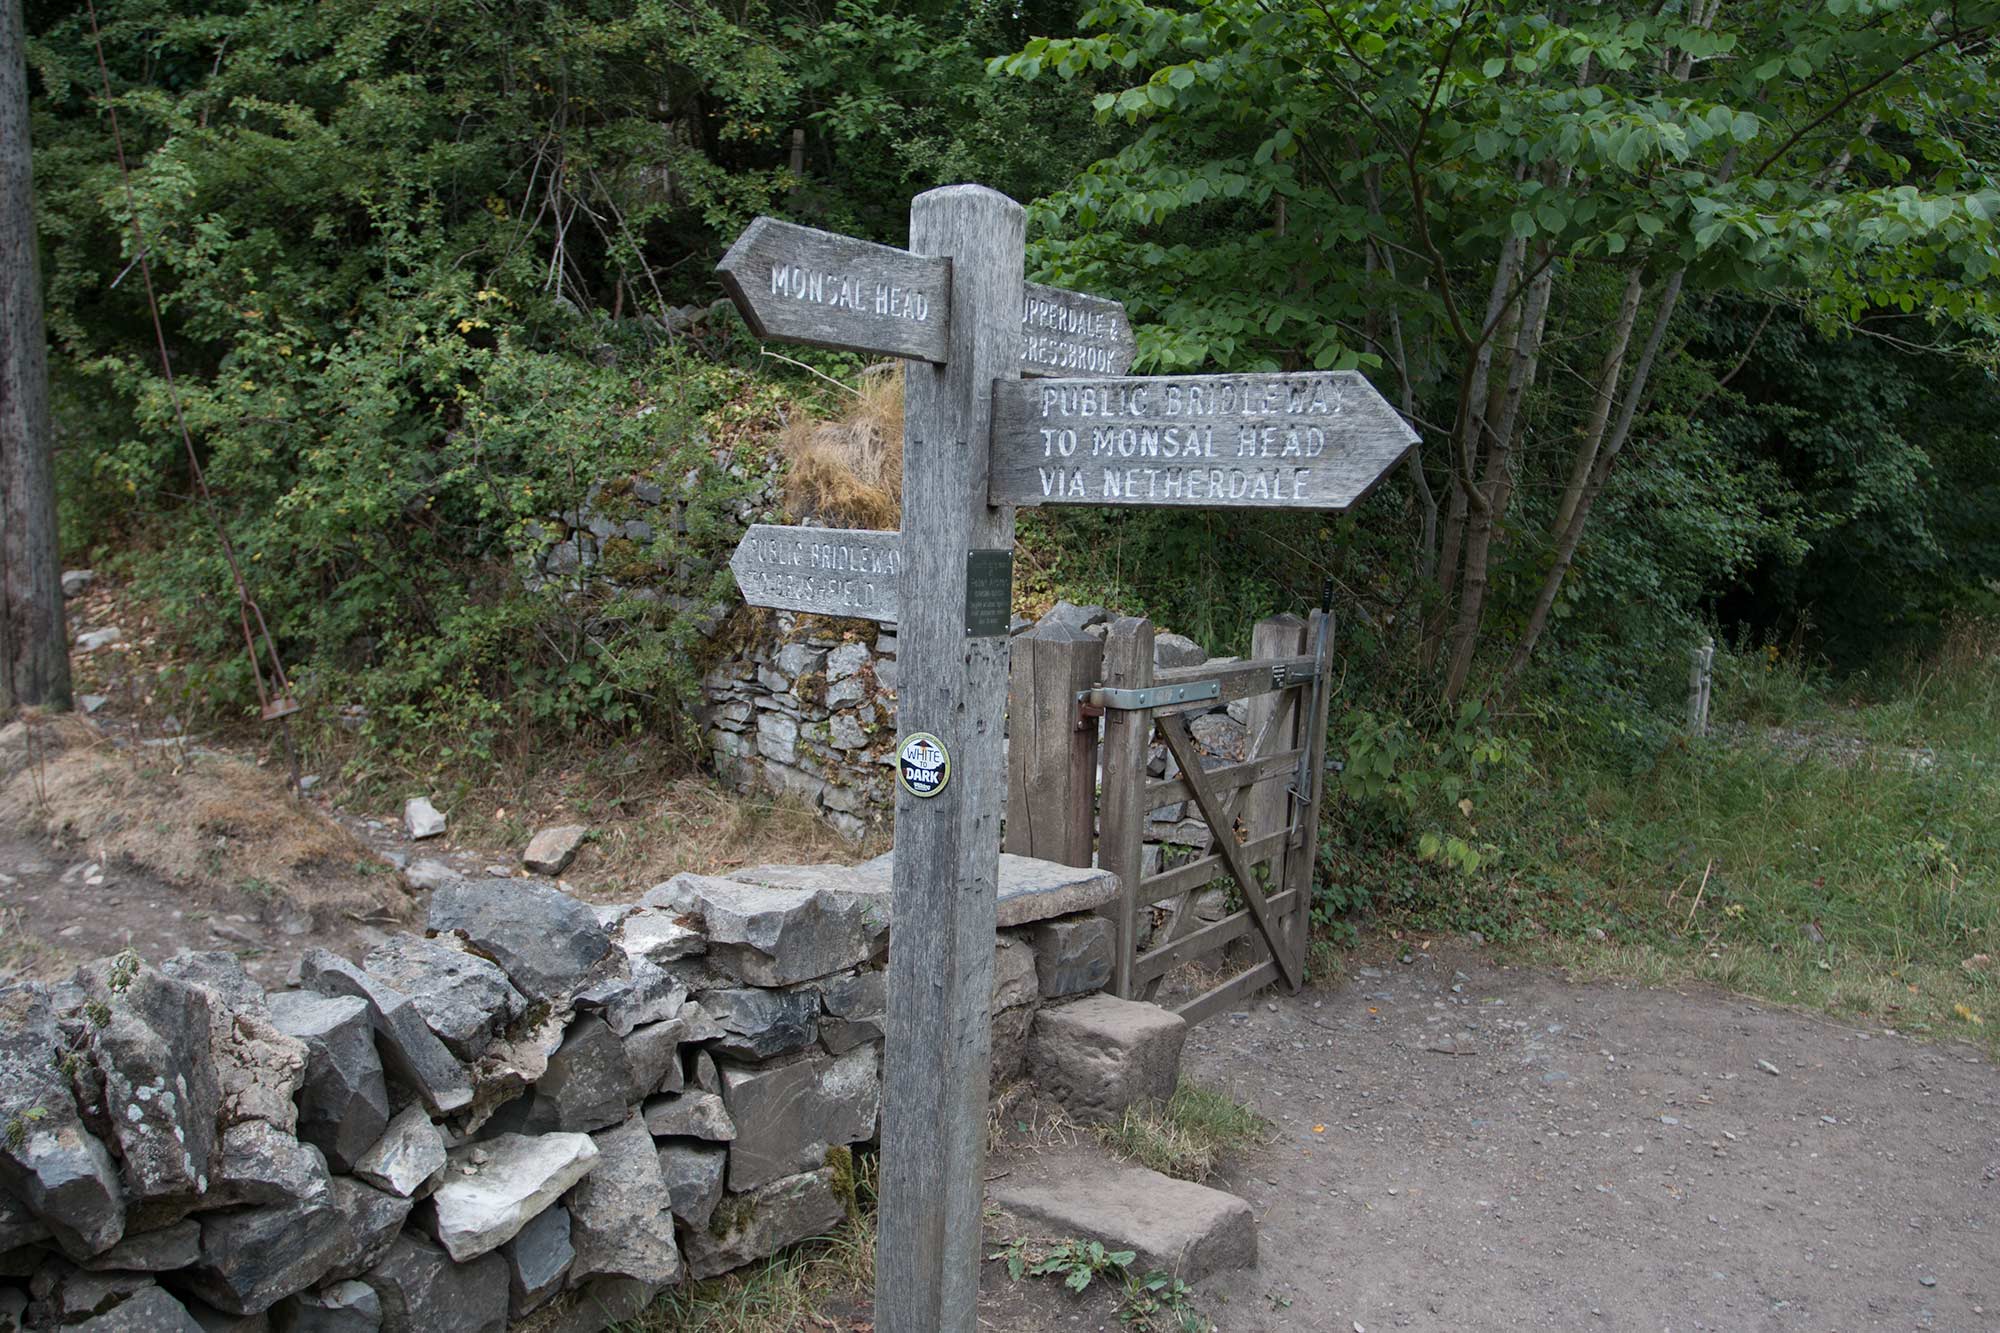 Signposts, gate and stile in a dry stone wall